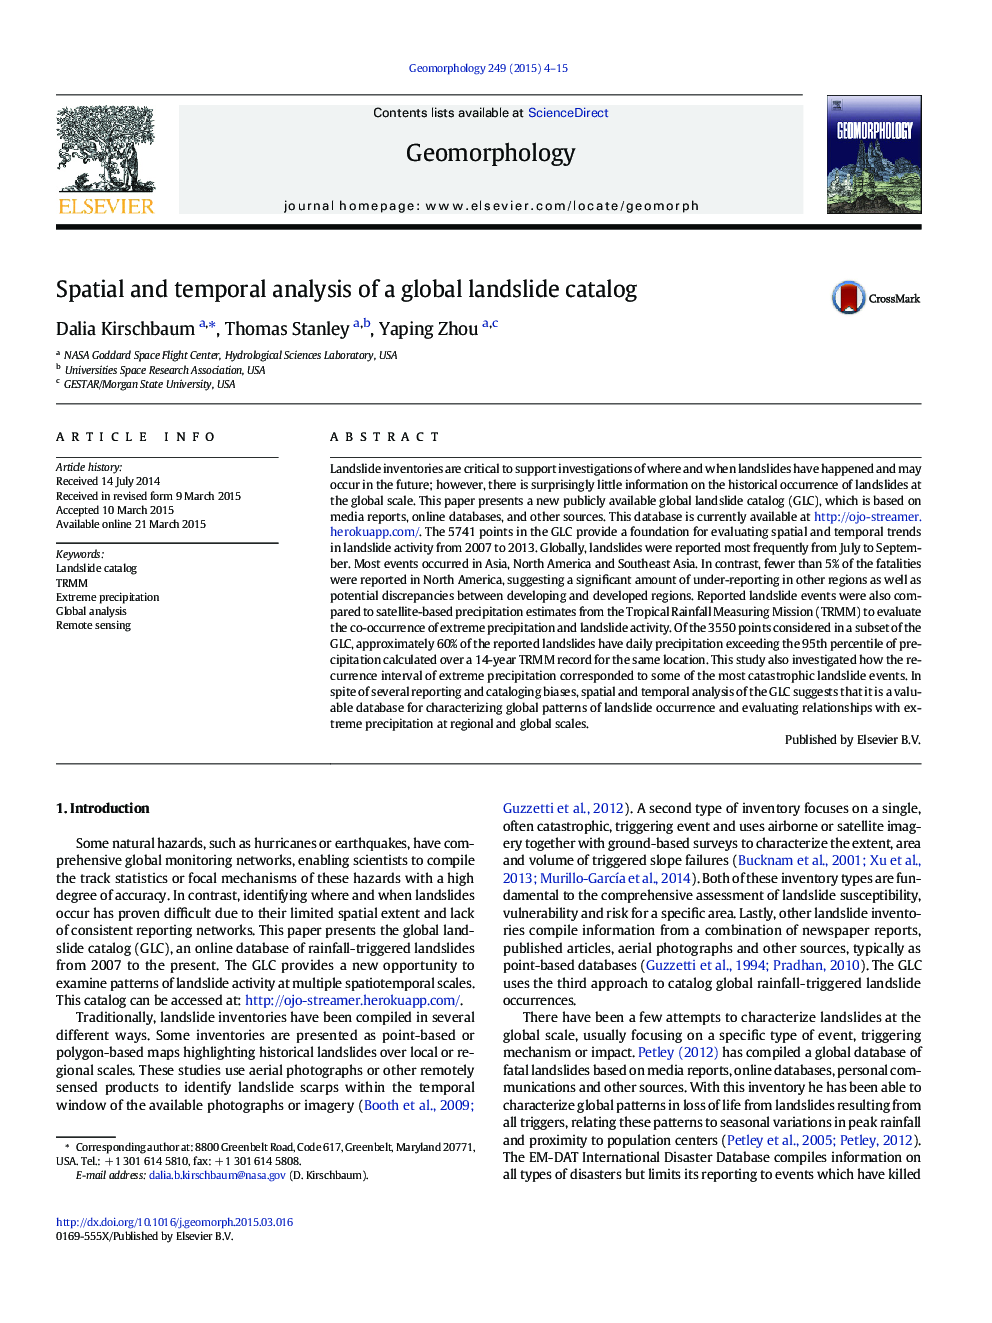 Spatial and temporal analysis of a global landslide catalog